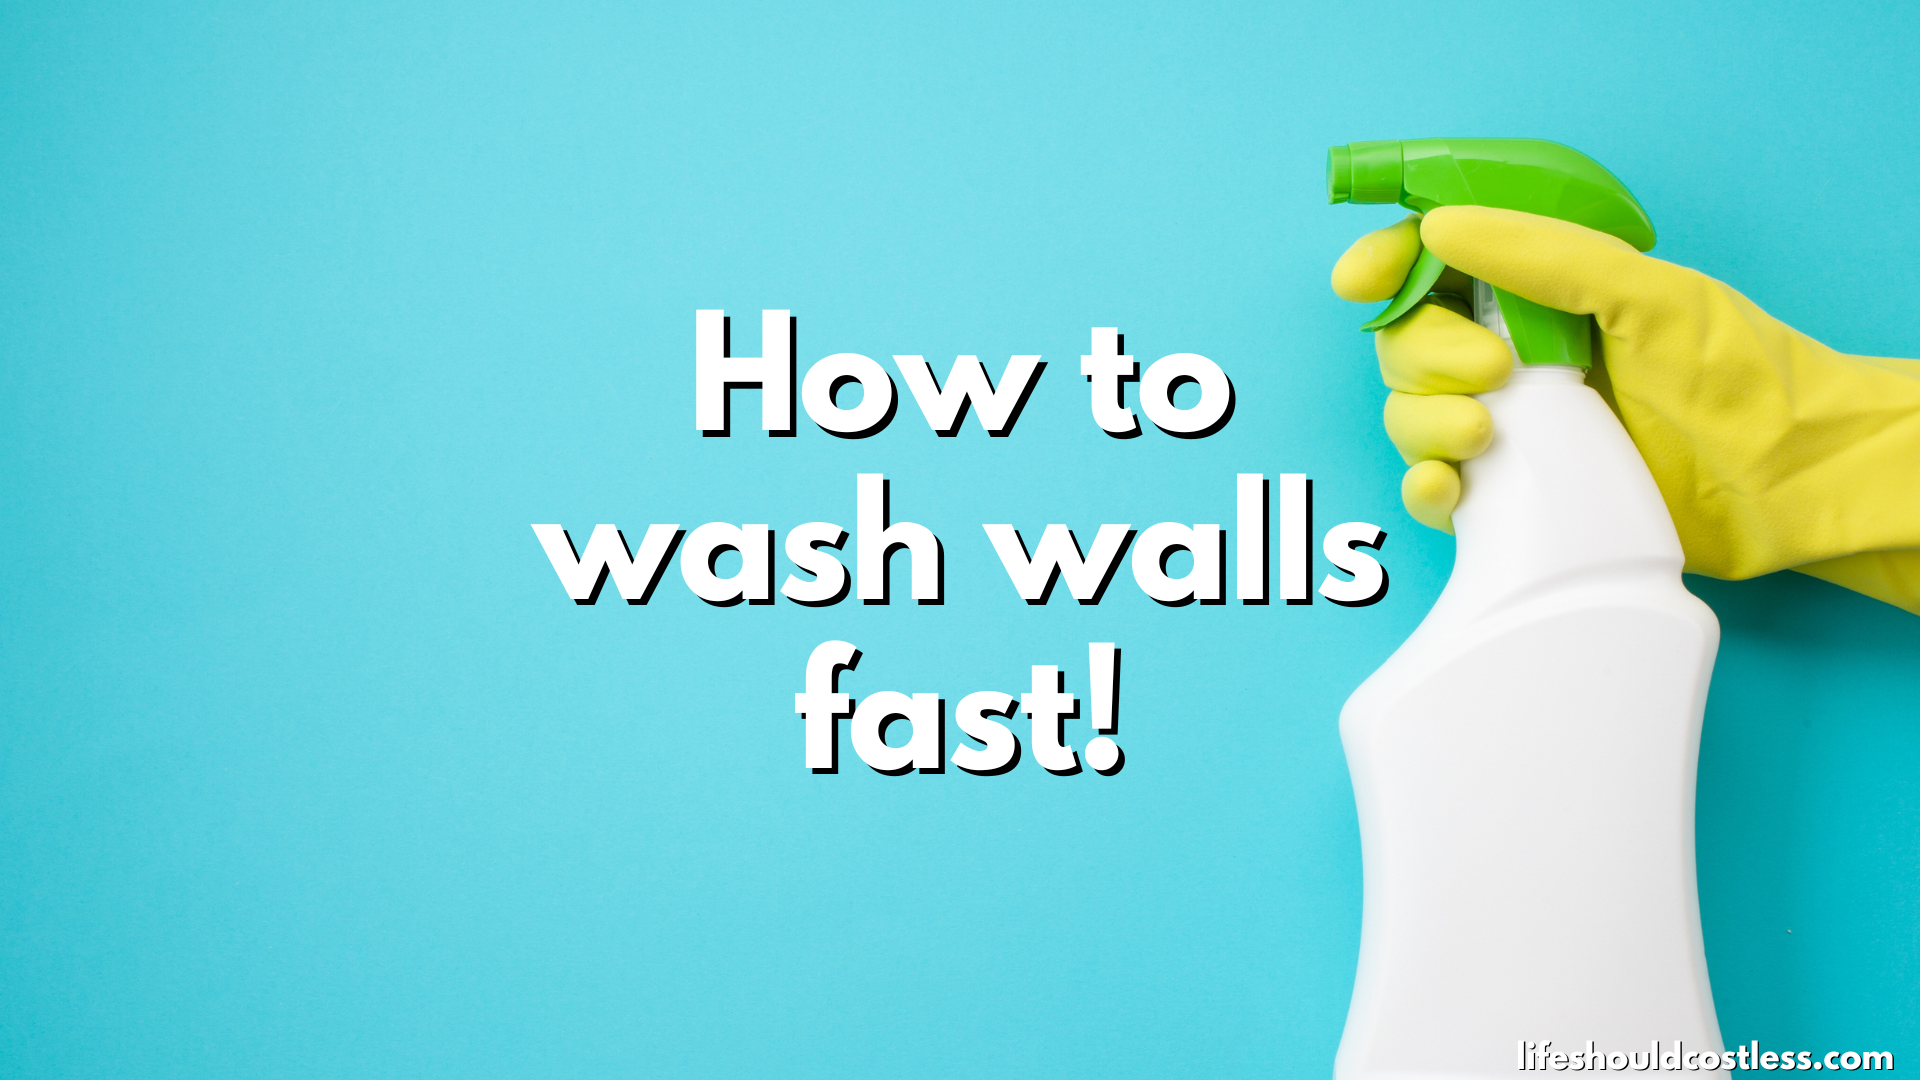 https://lifeshouldcostless.com/wp-content/uploads/2020/04/how-to-wash-walls-fast-2.png